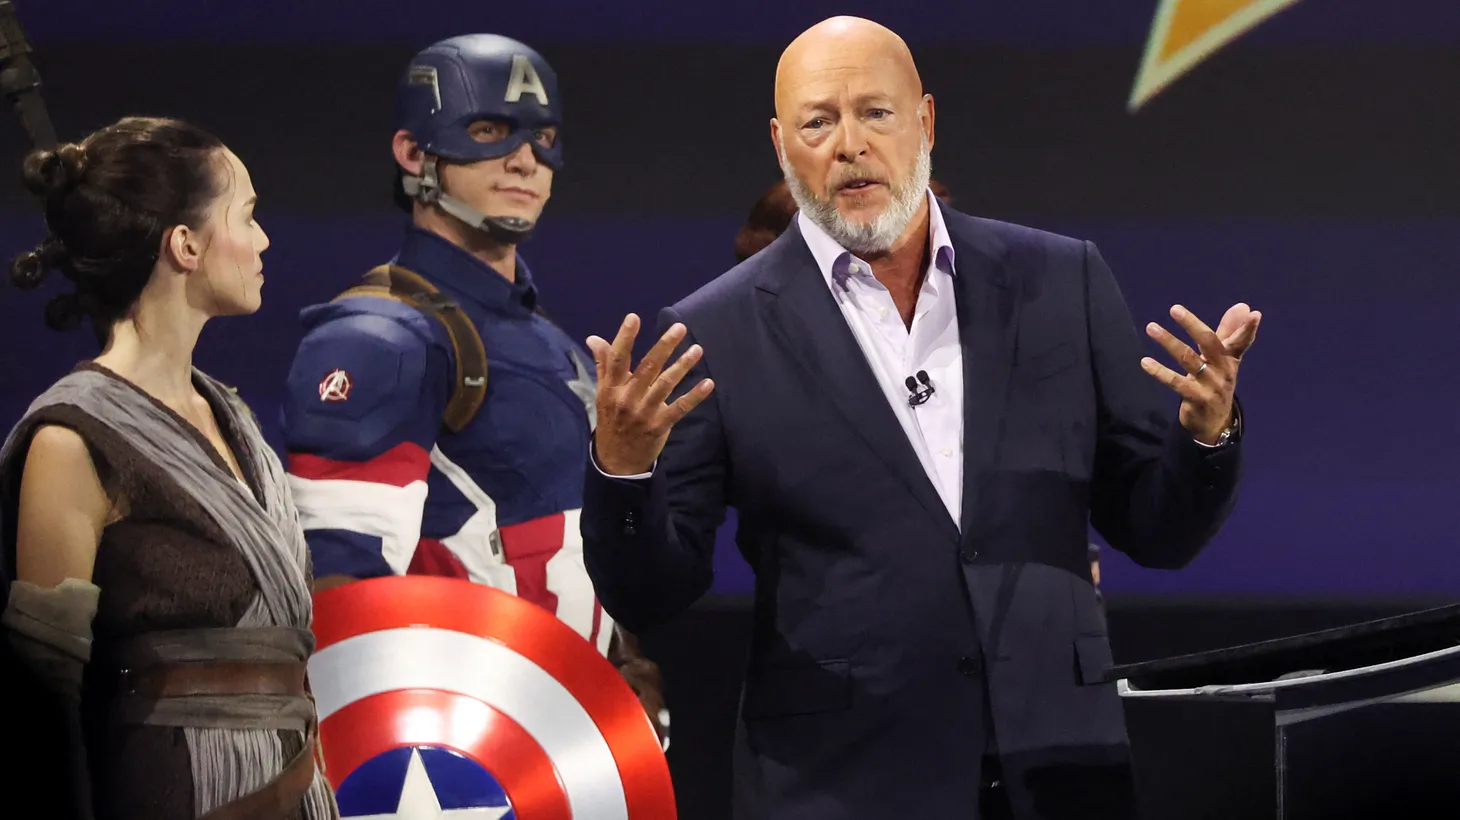 Bob Chapek, Chief Executive Officer of Disney, speaks at the 2022 Disney Legends Awards during Disney's D23 Expo in Anaheim, California, on September 9, 2022.